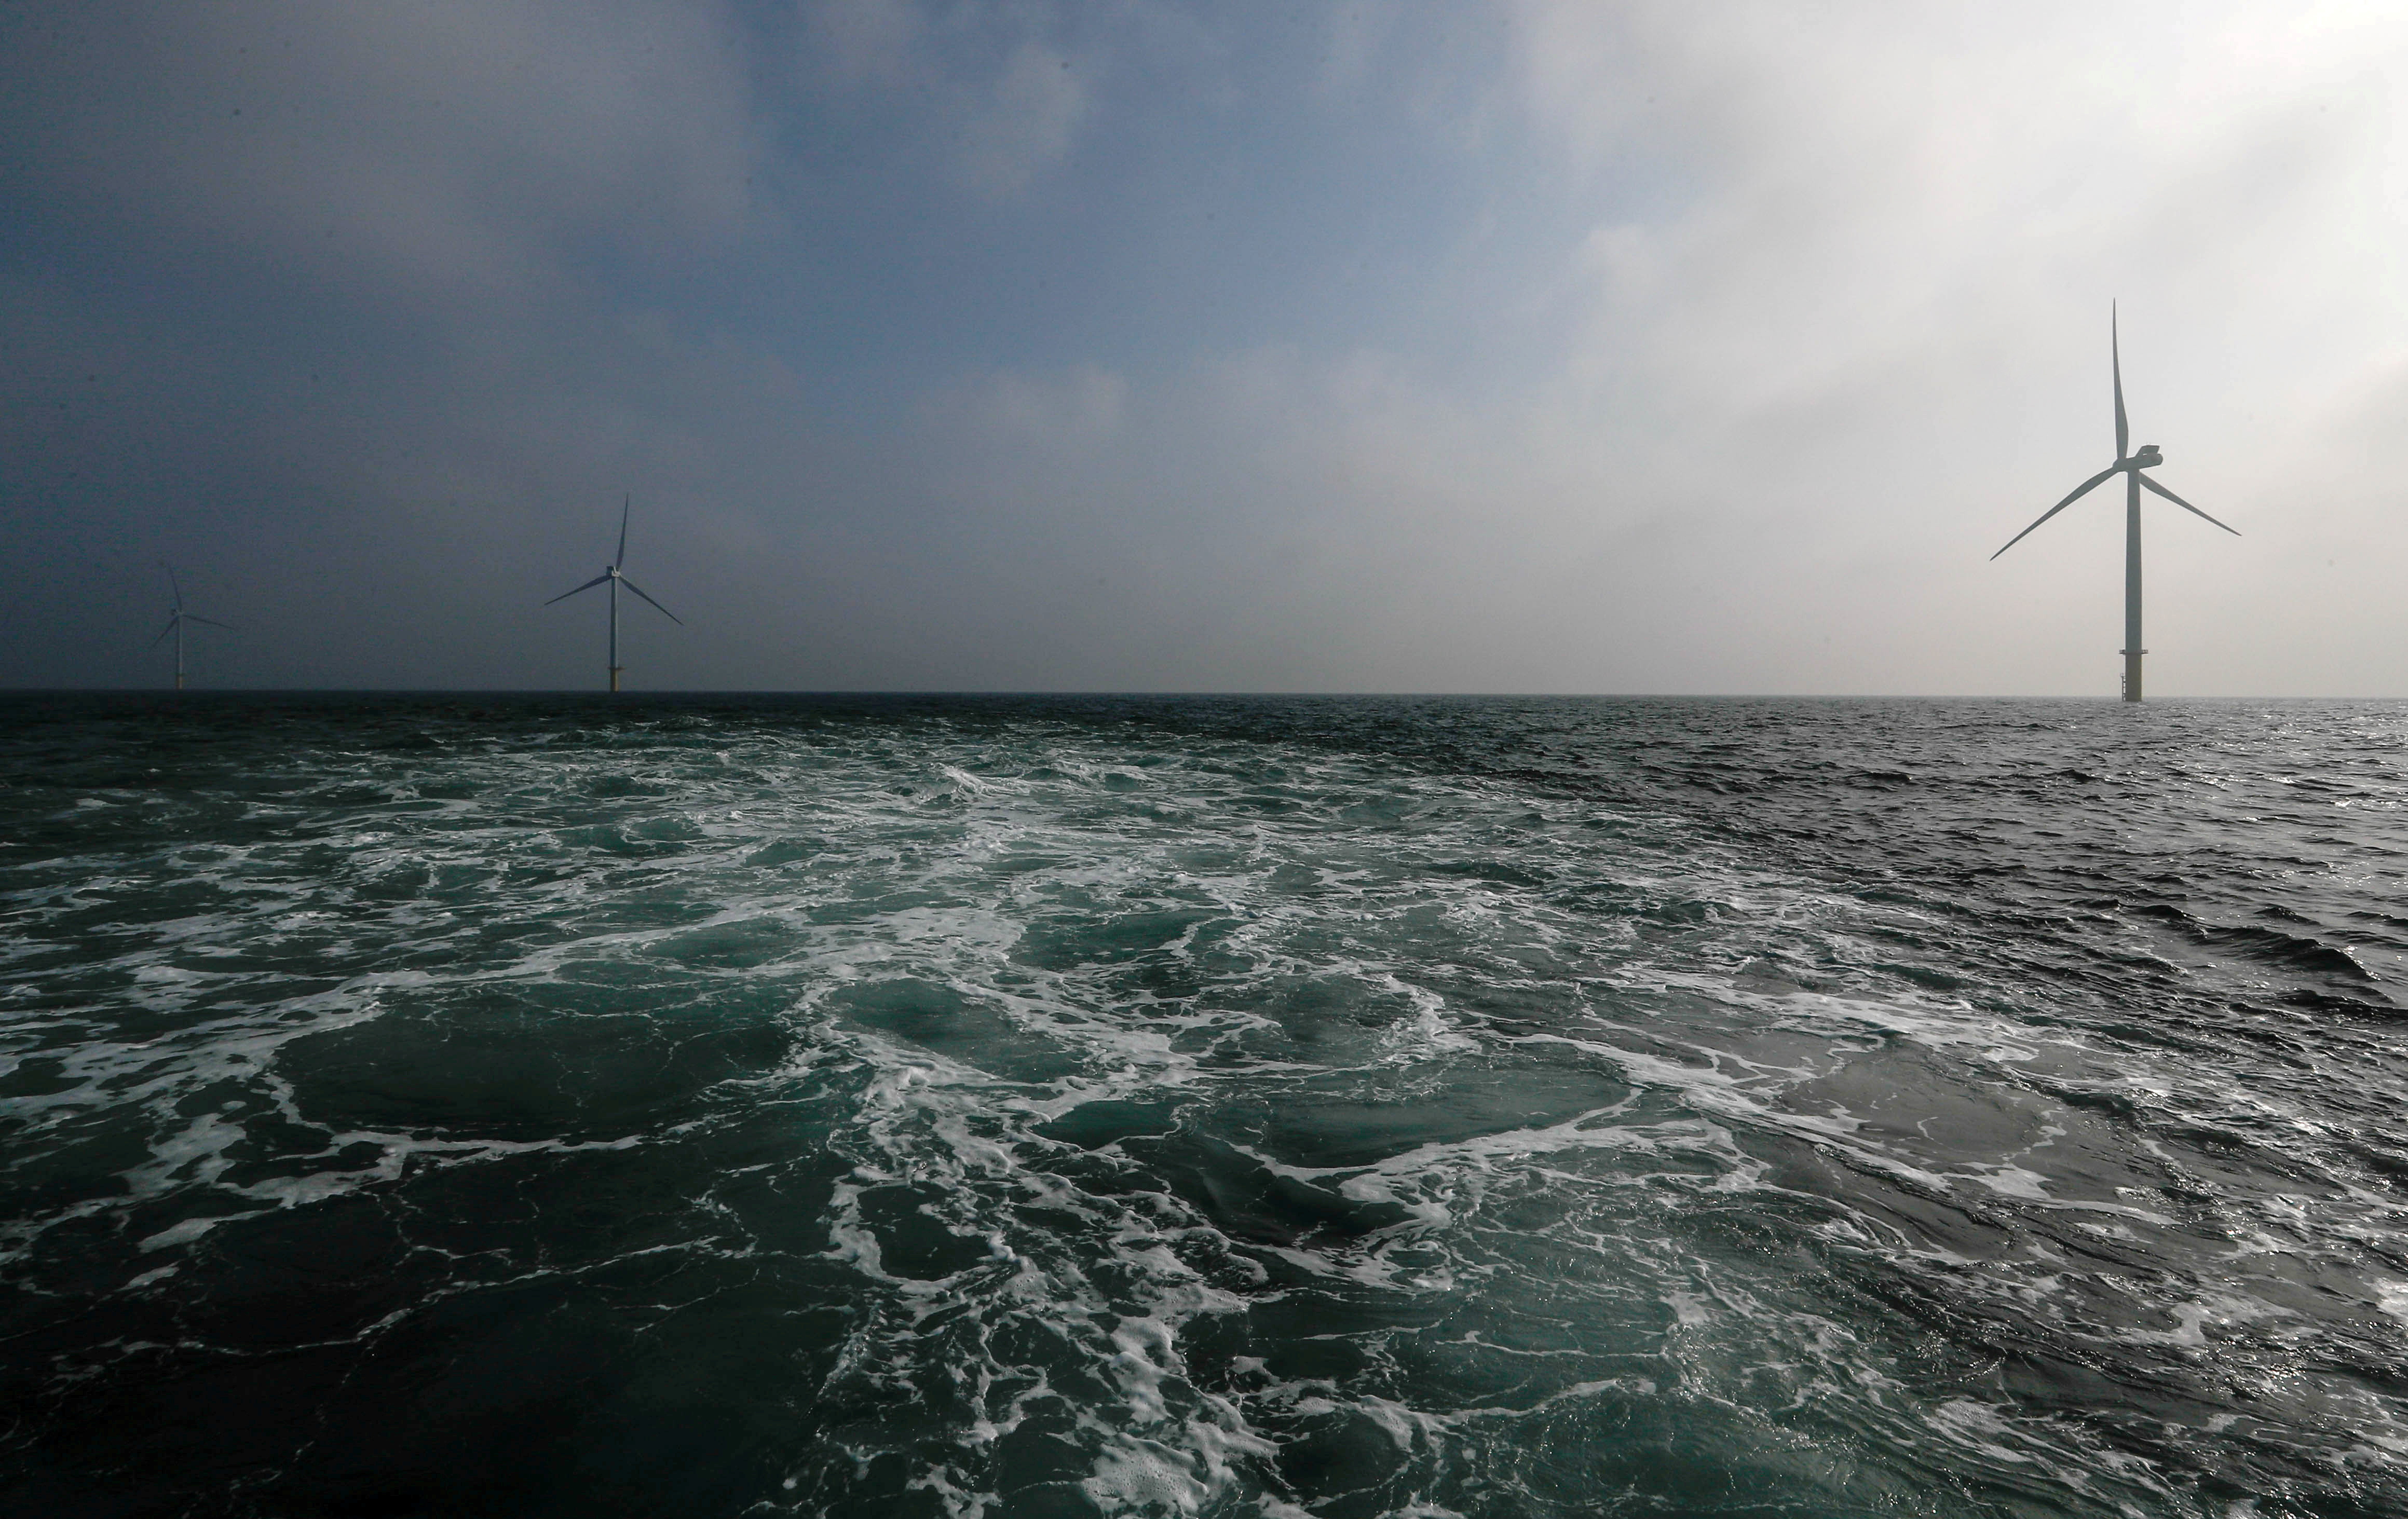 Power-generating windmill turbines are seen at the Eneco Luchterduinen offshore wind farm near Amsterdam